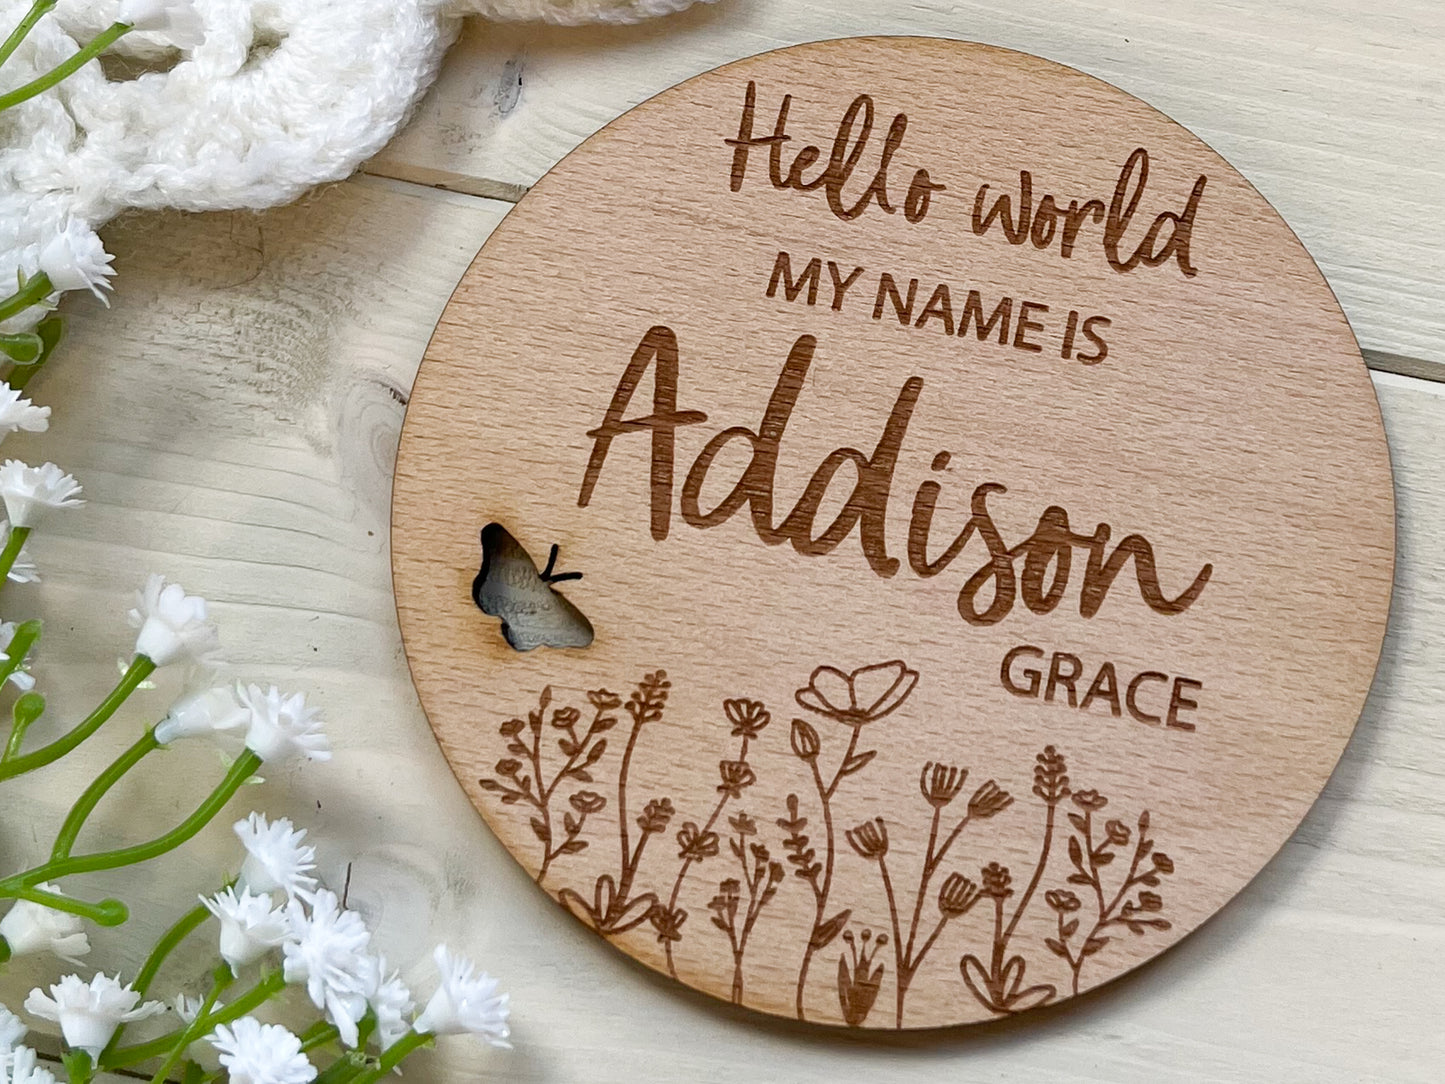 Hello World My Name Is Announcement plaque